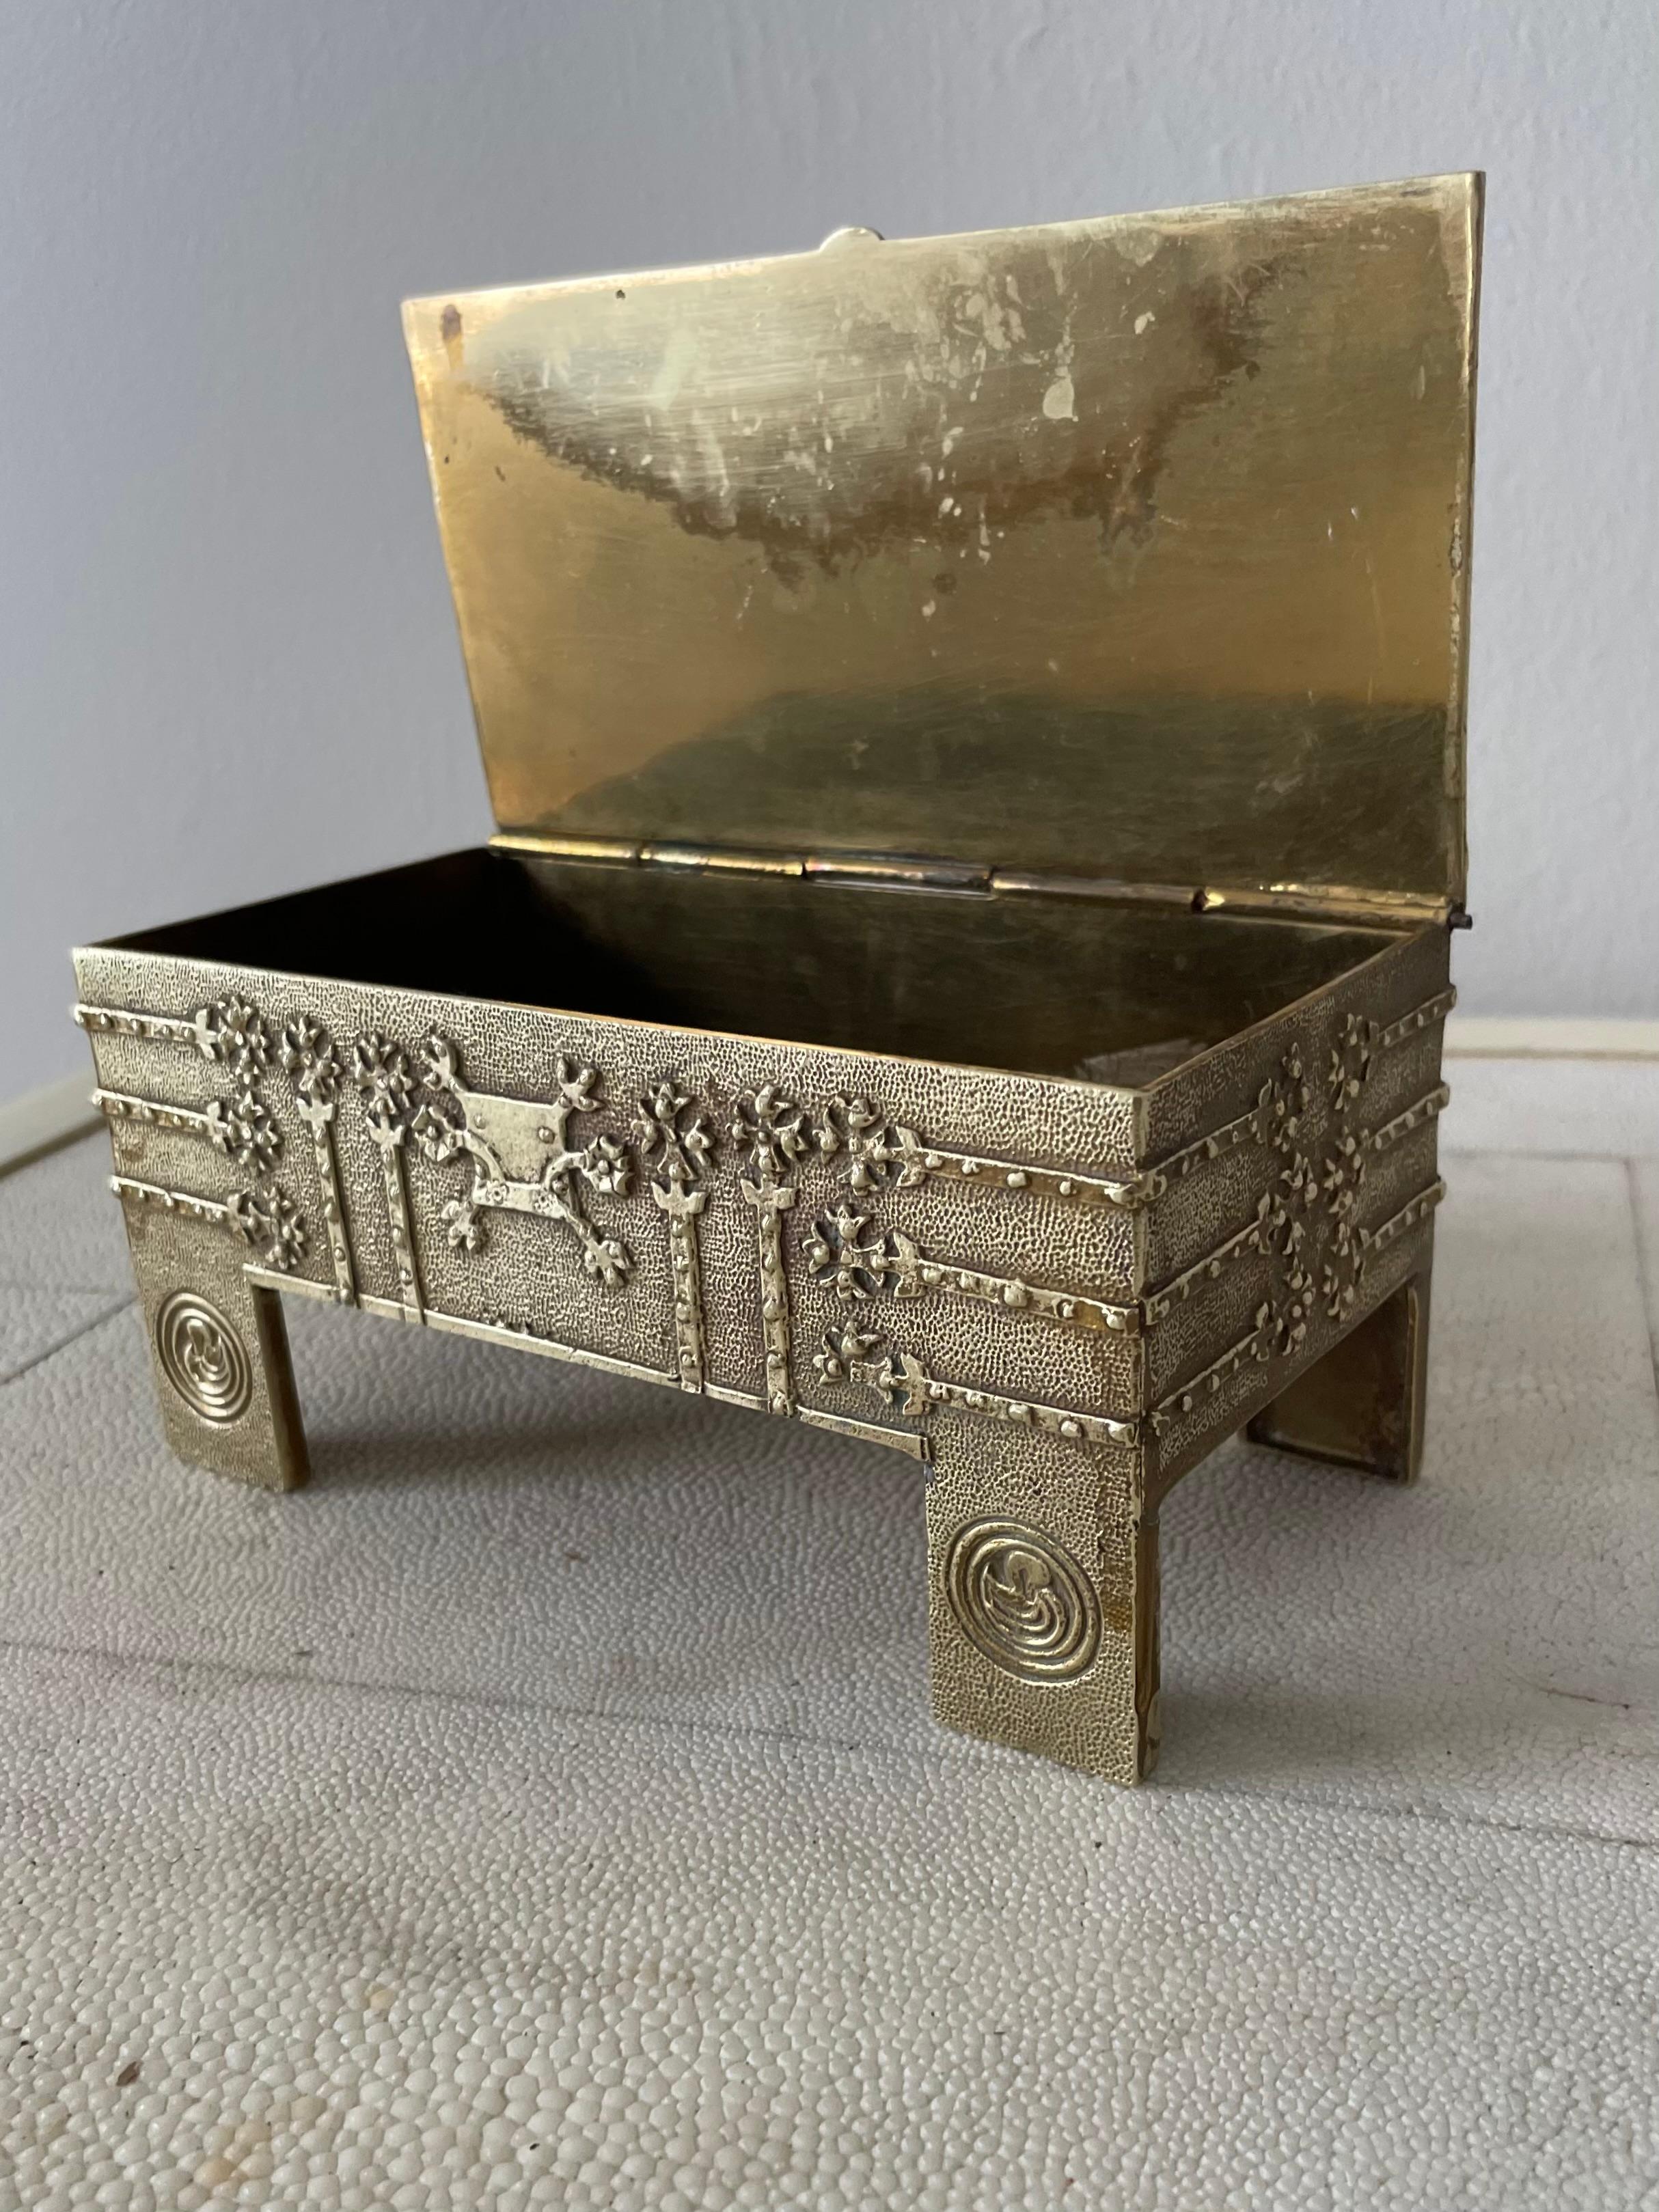 Brutalist Hammered Brass Box or Jewelry Casket For Sale 1